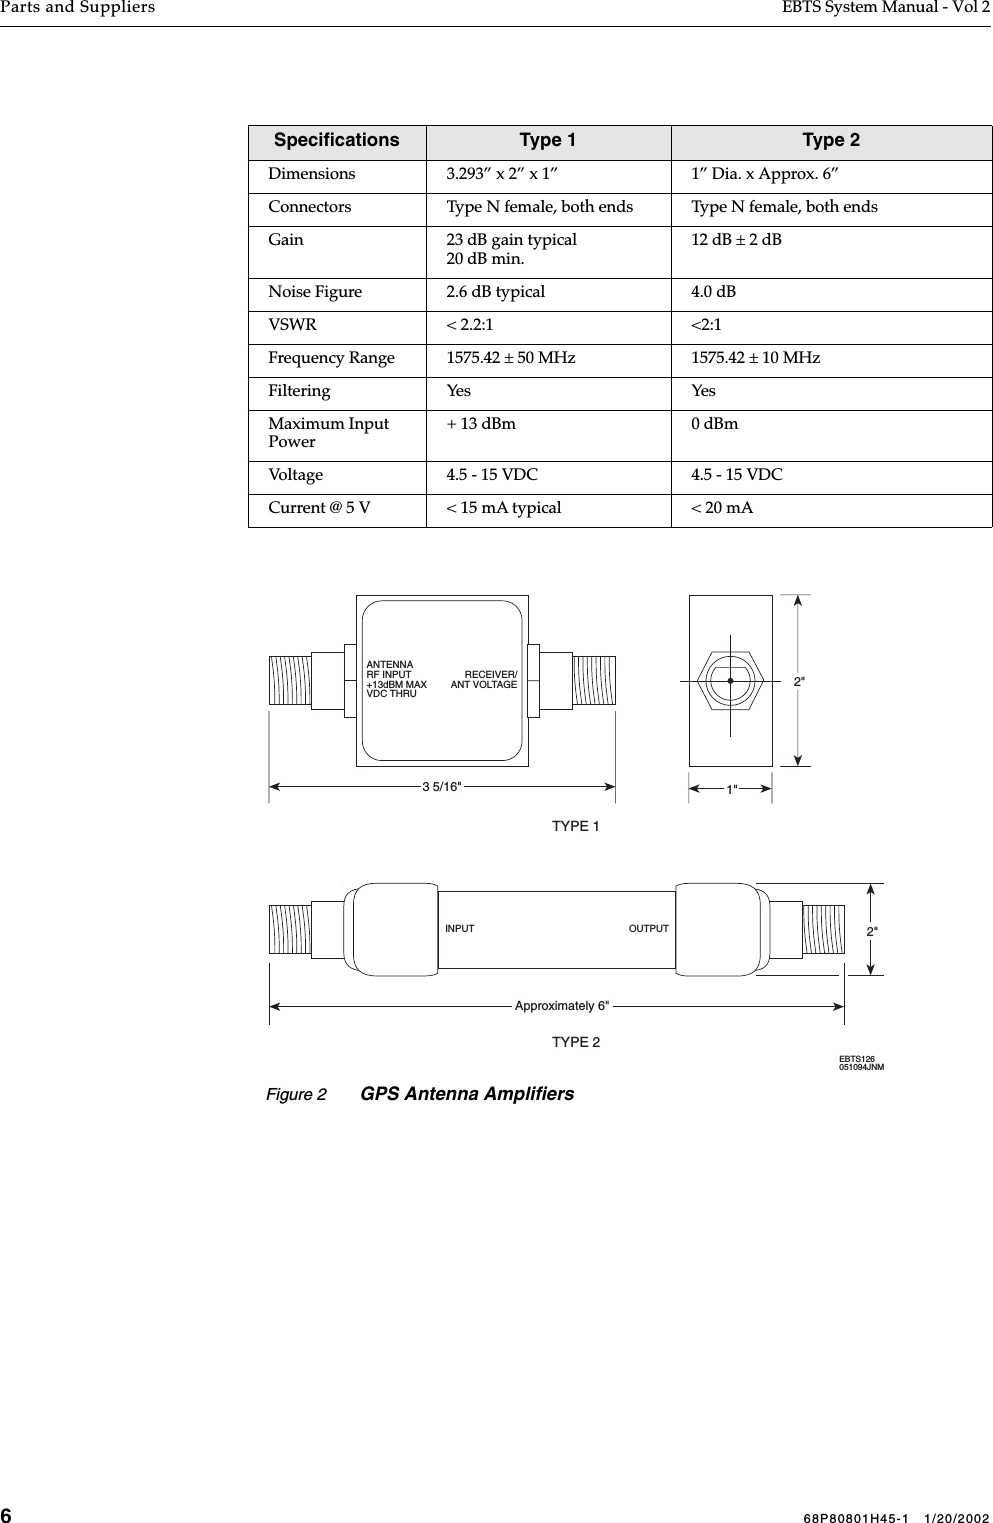 668P80801H45-1   1/20/2002Parts and Suppliers EBTS System Manual - Vol 2 Speciﬁcations Type 1 Type 2Dimensions 3.293” x 2” x 1” 1” Dia. x Approx. 6”Connectors Type N female, both ends Type N female, both endsGain 23 dB gain typical20 dB min.12 dB ± 2 dBNoise Figure  2.6 dB typical 4.0 dBVSWR &lt; 2.2:1 &lt;2:1Frequency Range 1575.42 ± 50 MHz 1575.42 ± 10 MHzFiltering Yes YesMaximum Input Power+ 13 dBm 0 dBmVoltage 4.5 - 15 VDC 4.5 - 15 VDCCurrent @ 5 V &lt; 15 mA typical &lt; 20 mAFigure 2 GPS Antenna AmpliﬁersEBTS126051094JNMTYPE 1TYPE 21&quot;2&quot;3 5/16&quot;ANTENNARF INPUT+13dBM MAXVDC THRURECEIVER/ANT VOLTAGEApproximately 6&quot;2&quot;INPUT OUTPUT